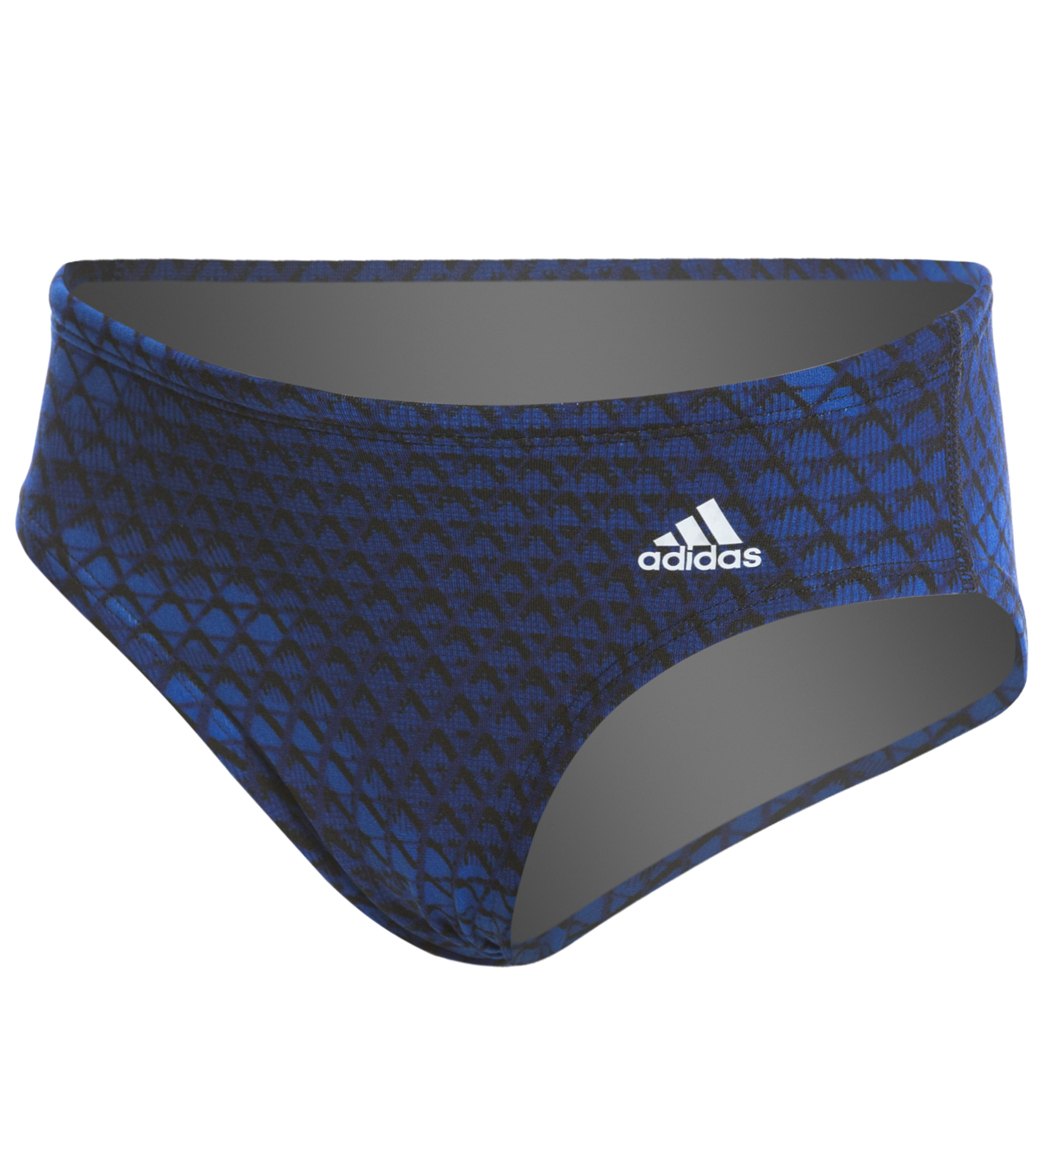 Adidas Boys' Web Brief Swimsuit at SwimOutlet.com